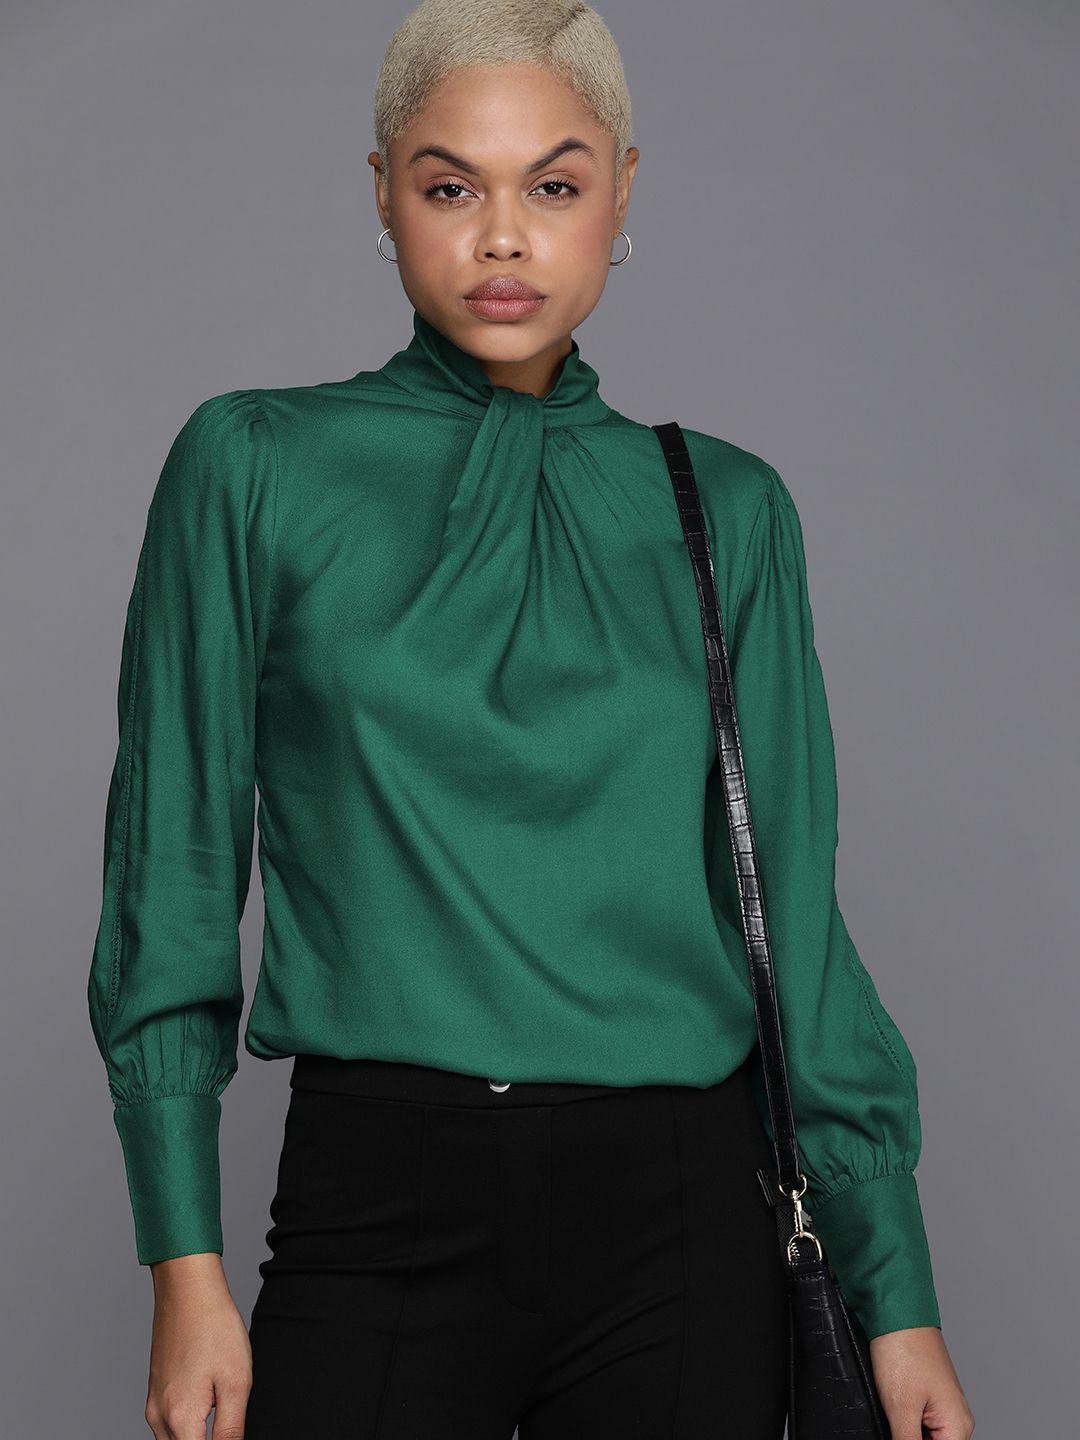 kenneth-cole-annodata-women-dark-green-knotted-neck-cuffed-sleeves-top